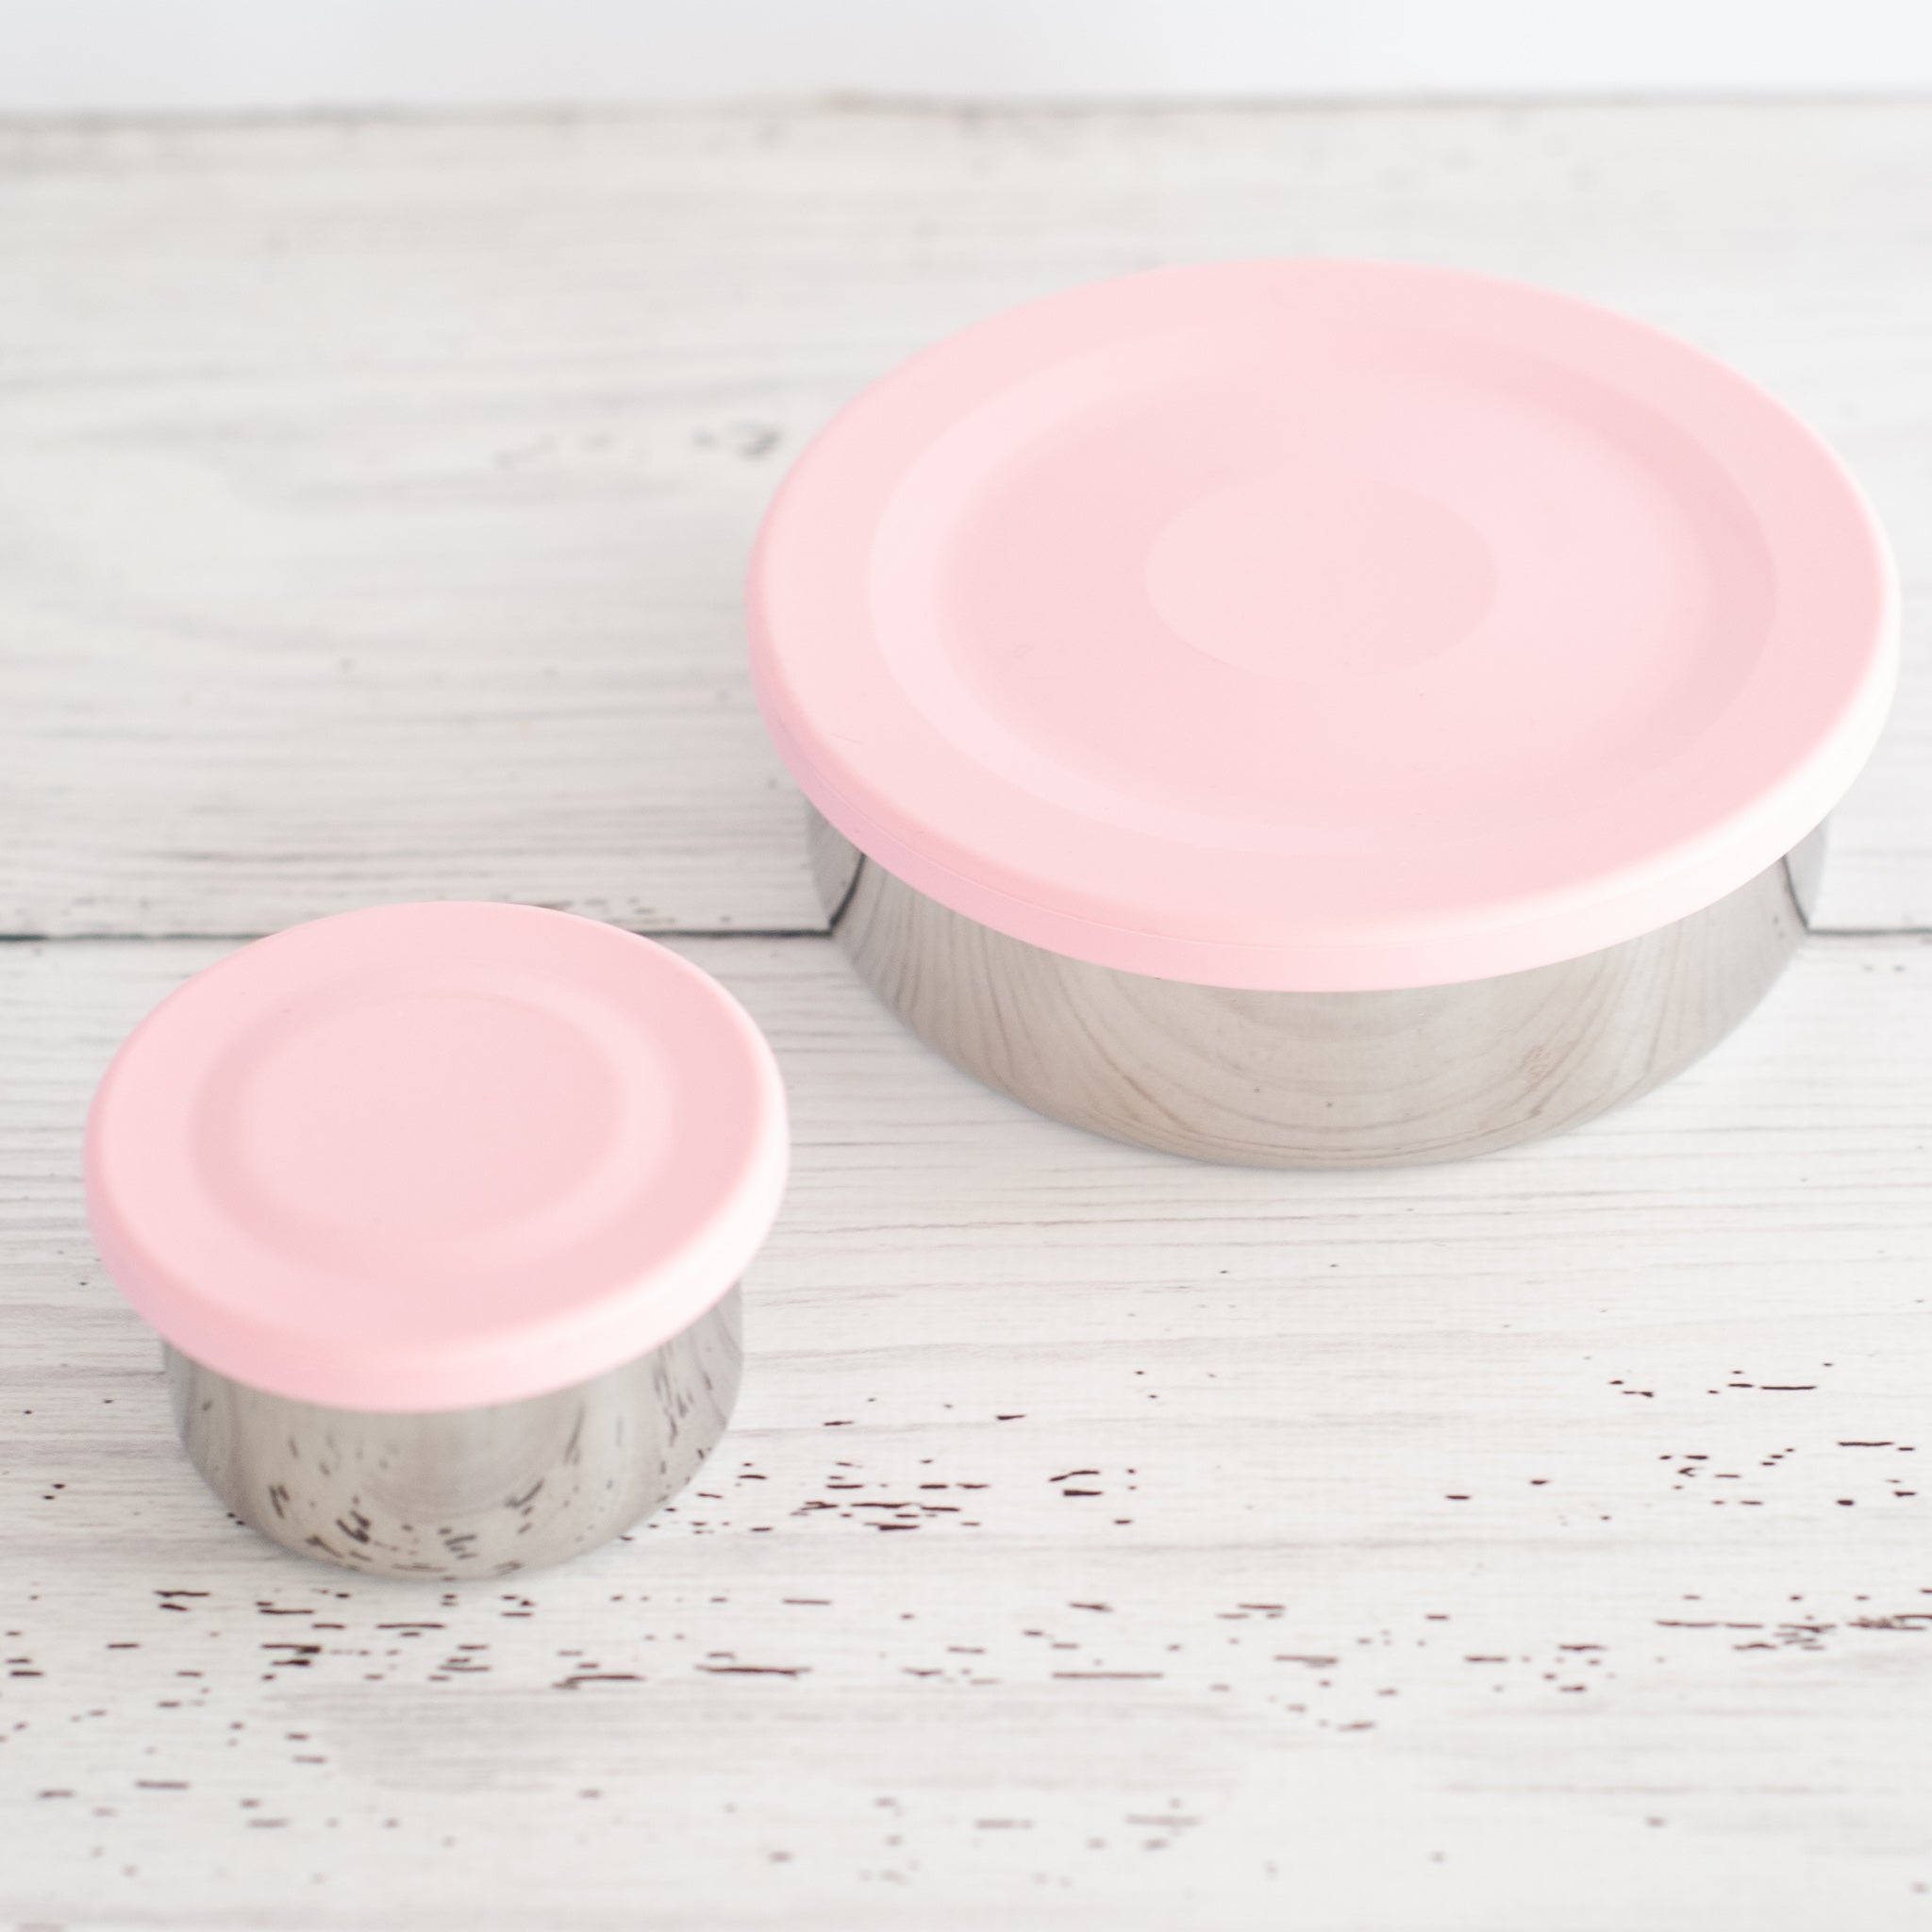 leak proof stainless steel snack container with pink silicone lid. nudie rudie lunch box